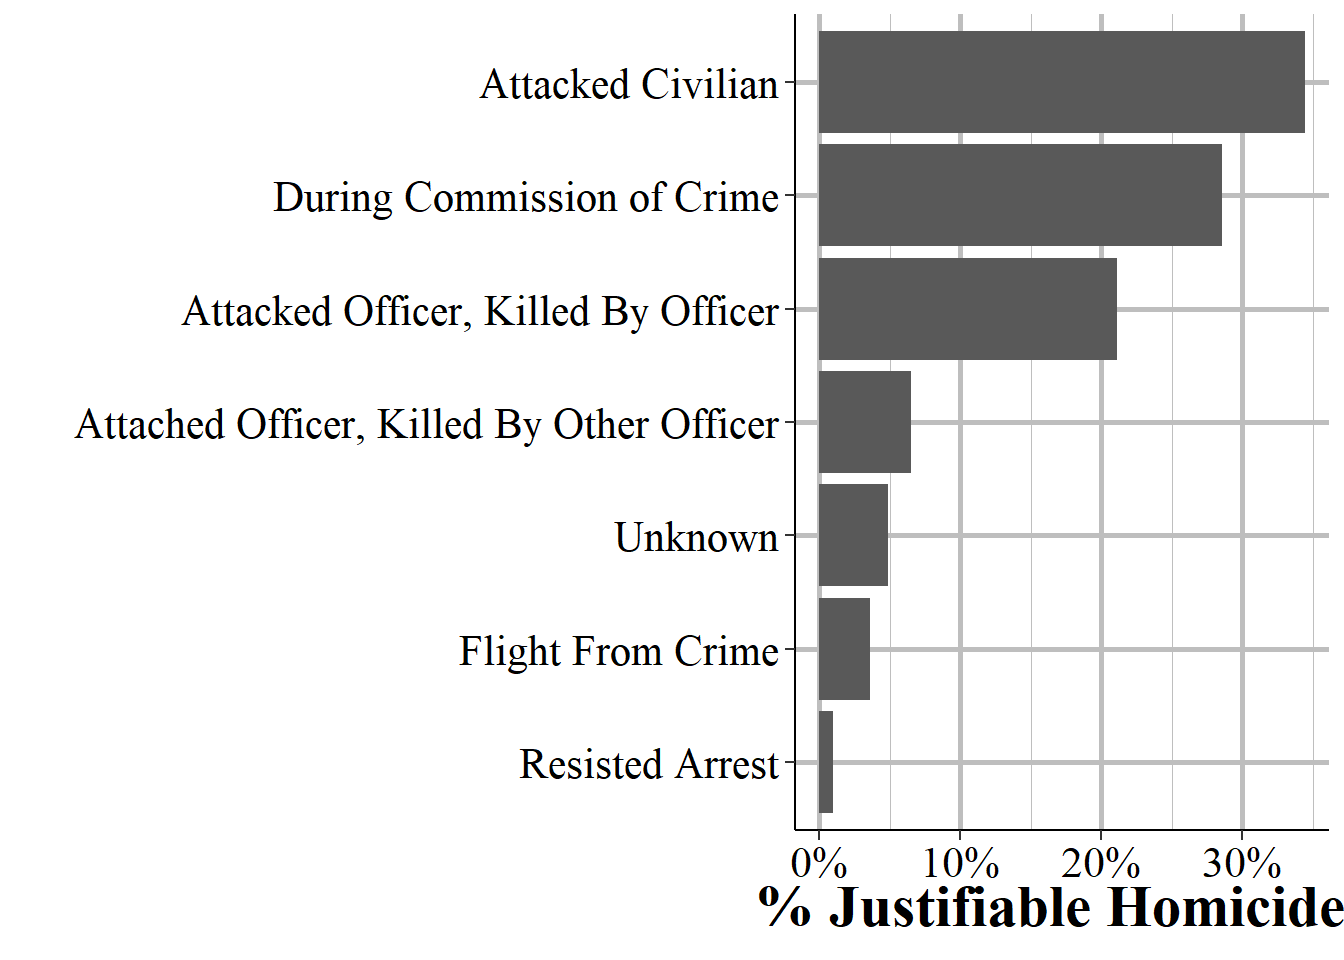 The distribution of circumstances for justifiable homicides (N = 308 in 2019 for all agencies reporting).